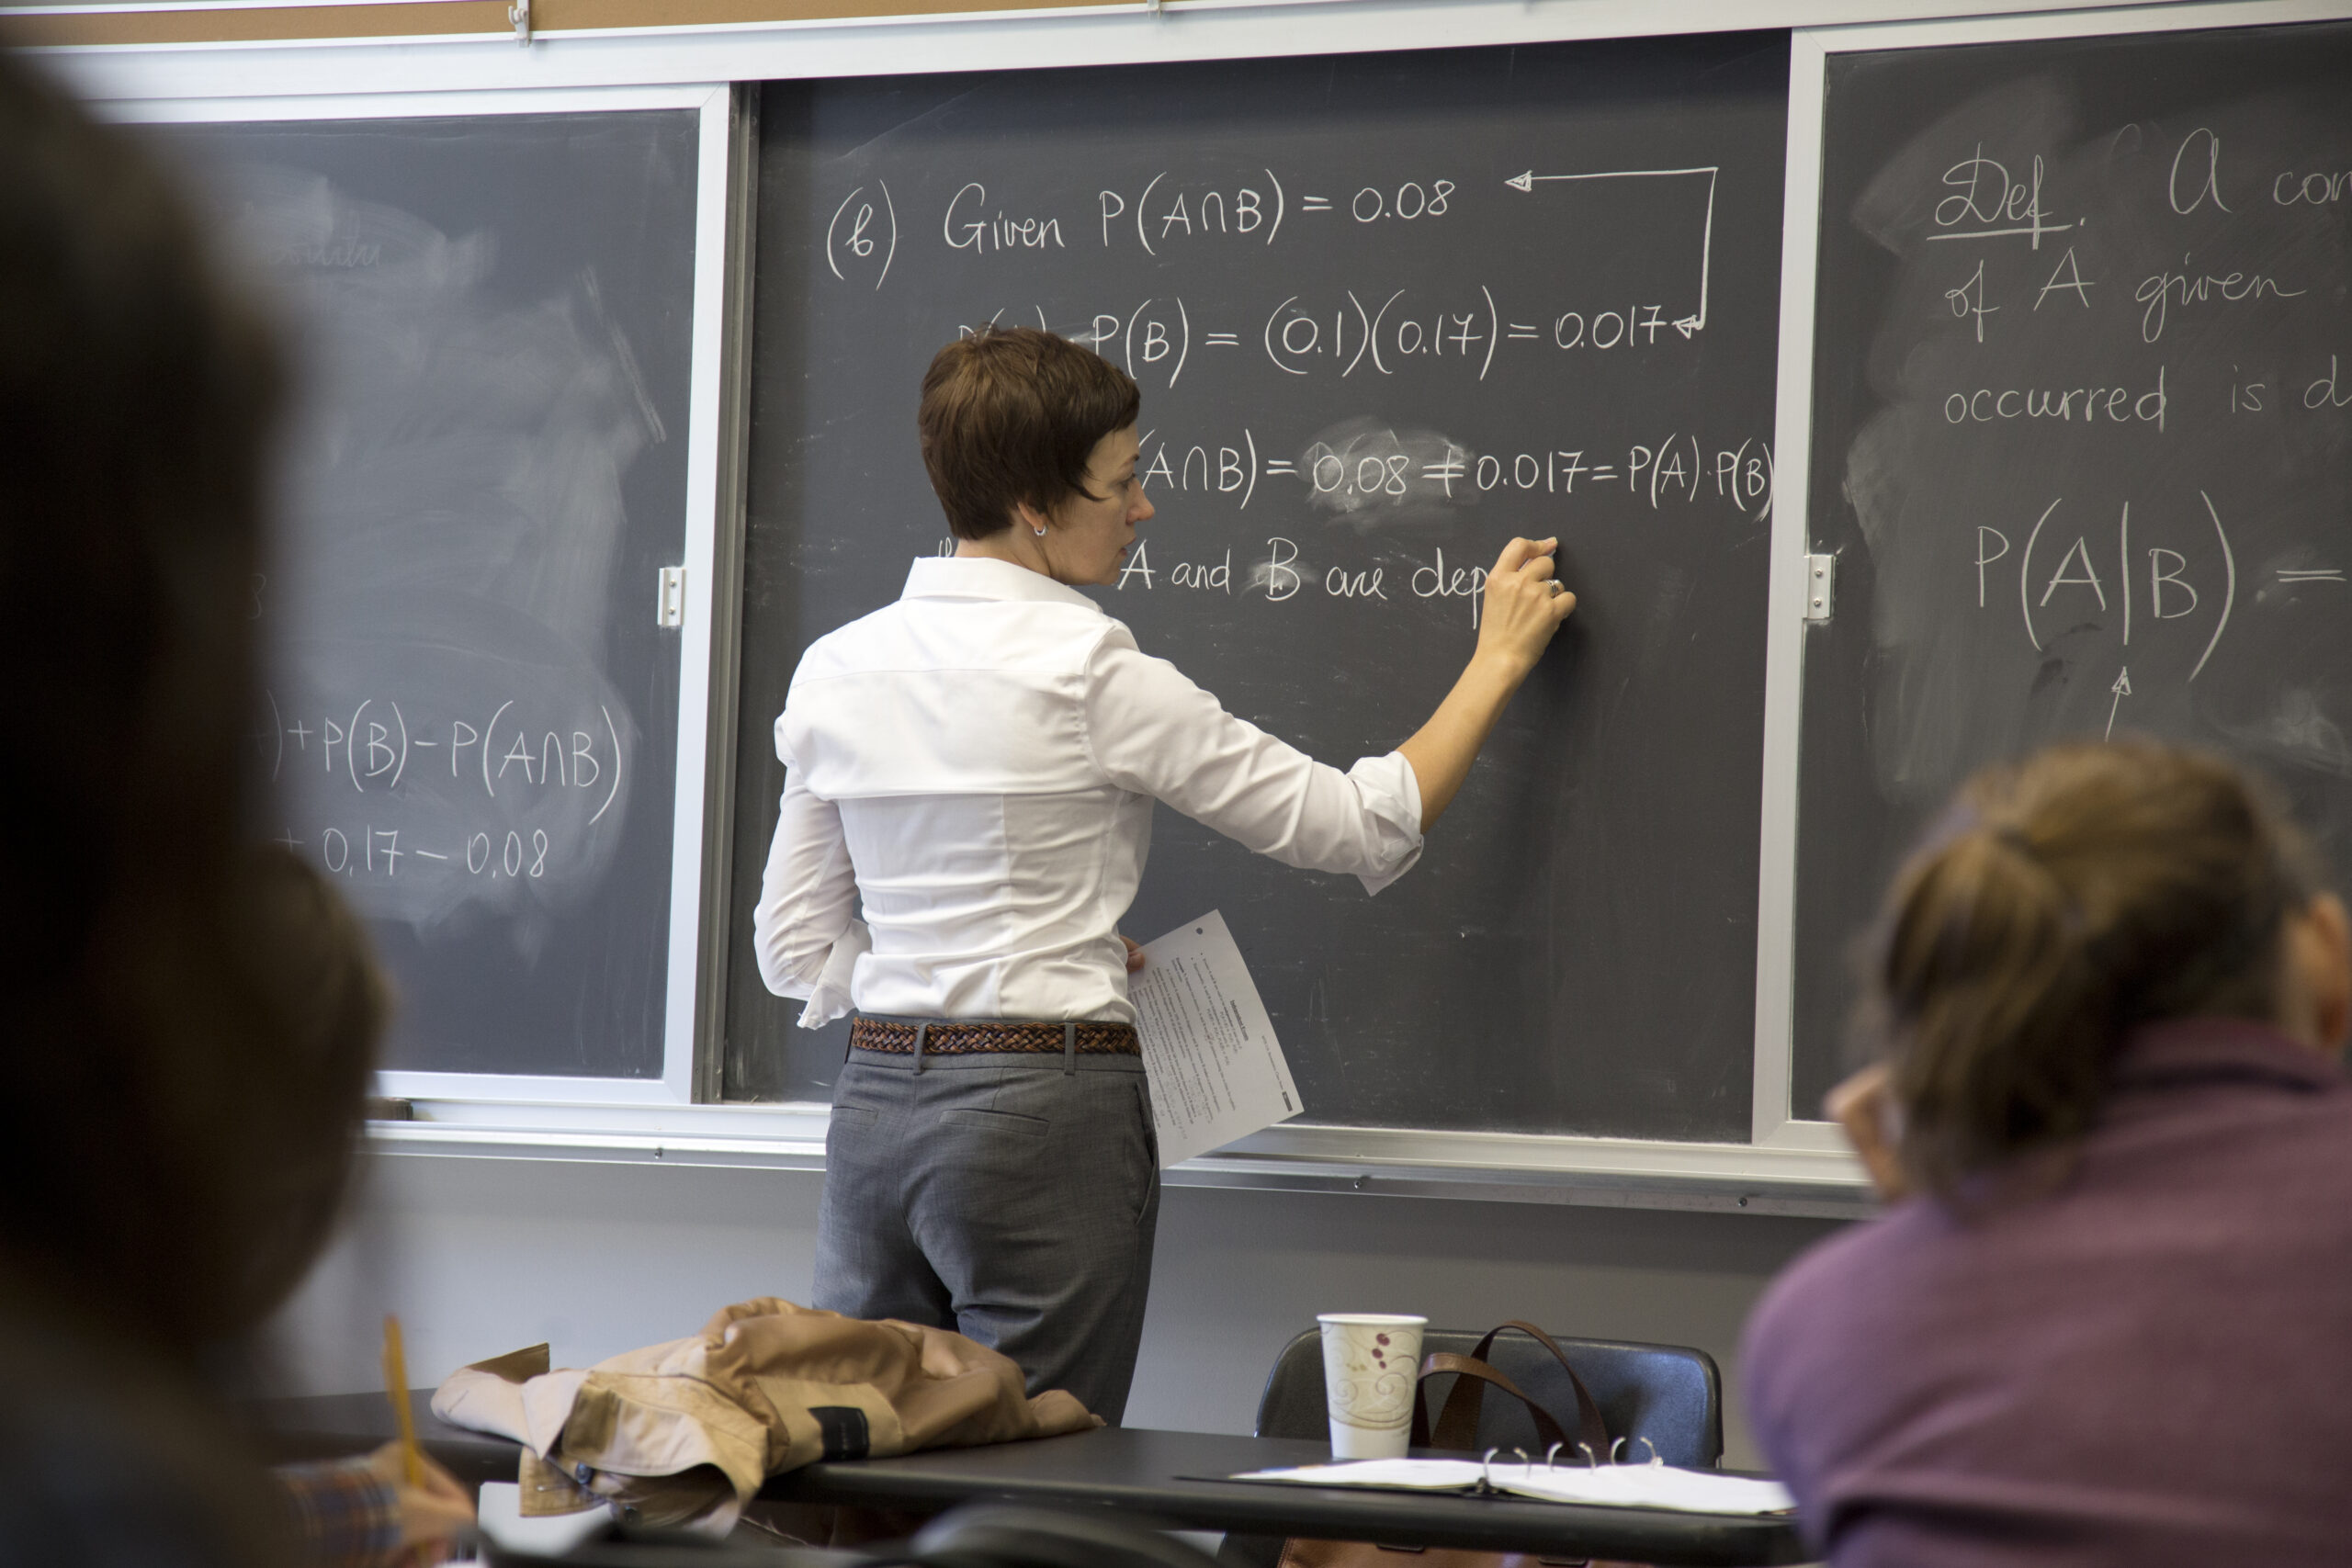 Dr. Asta Shomberg explains mathematical concepts to students.